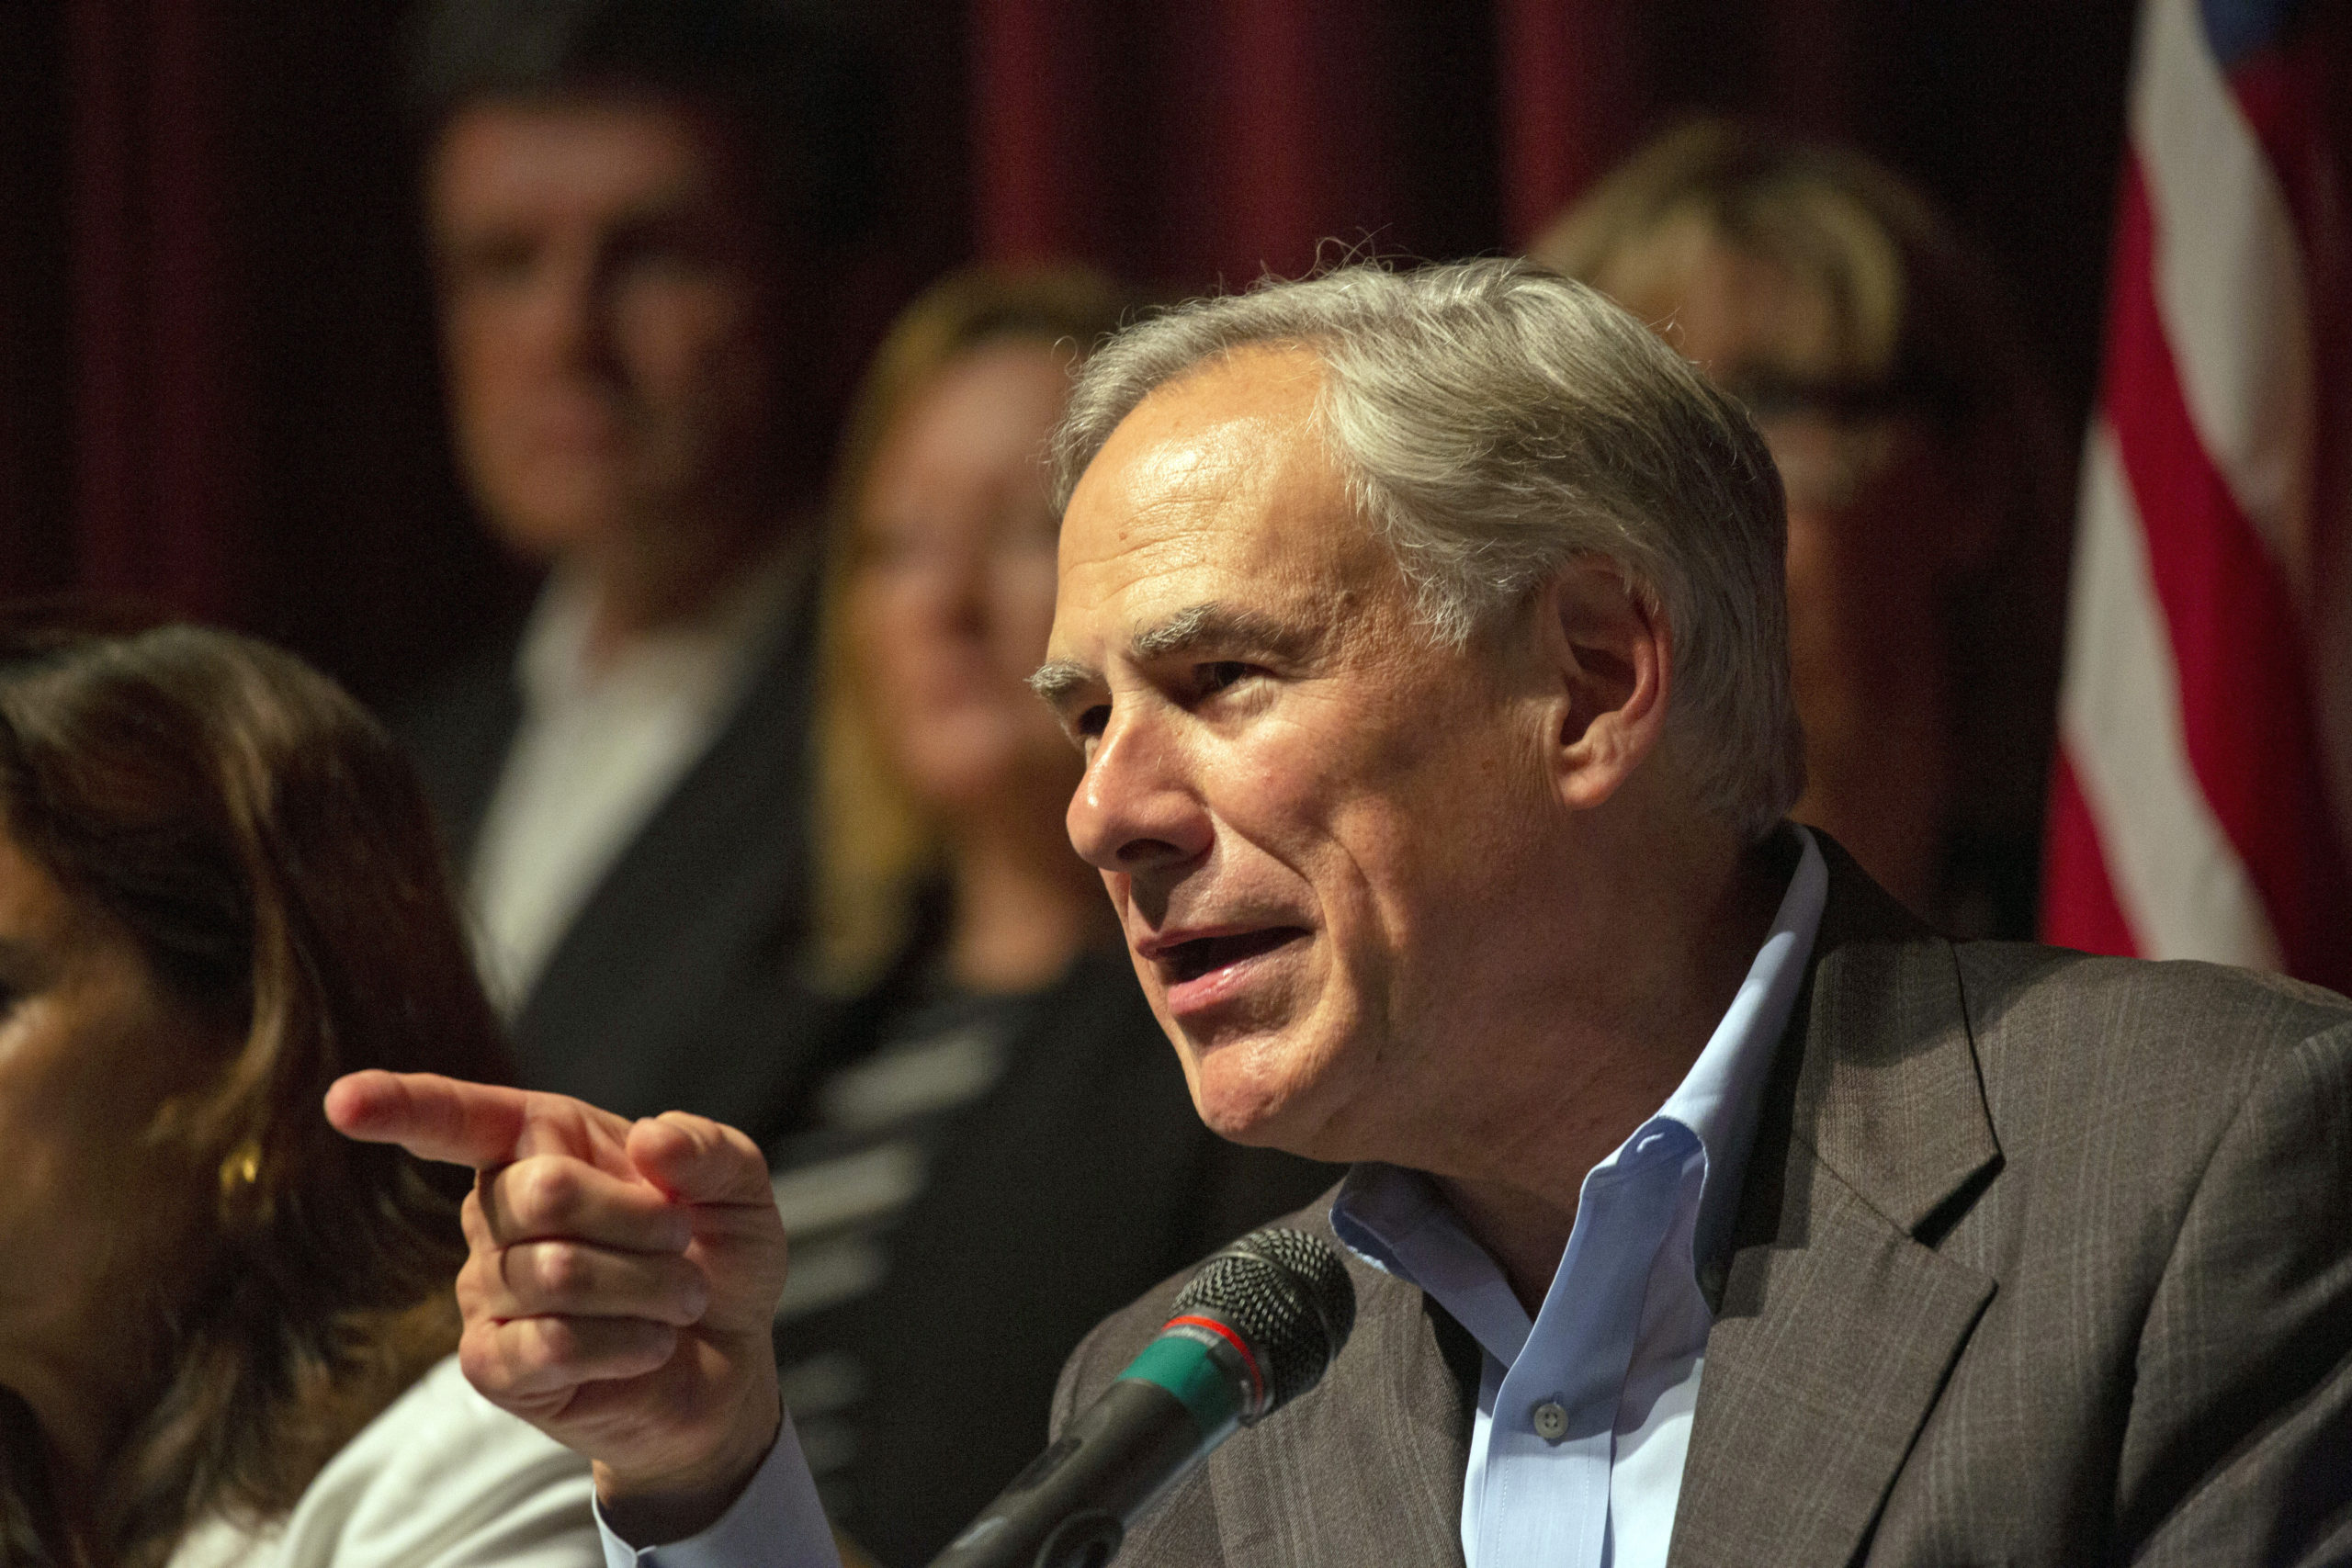 Greg Abbott points as he speaks, wearing a serious expression.